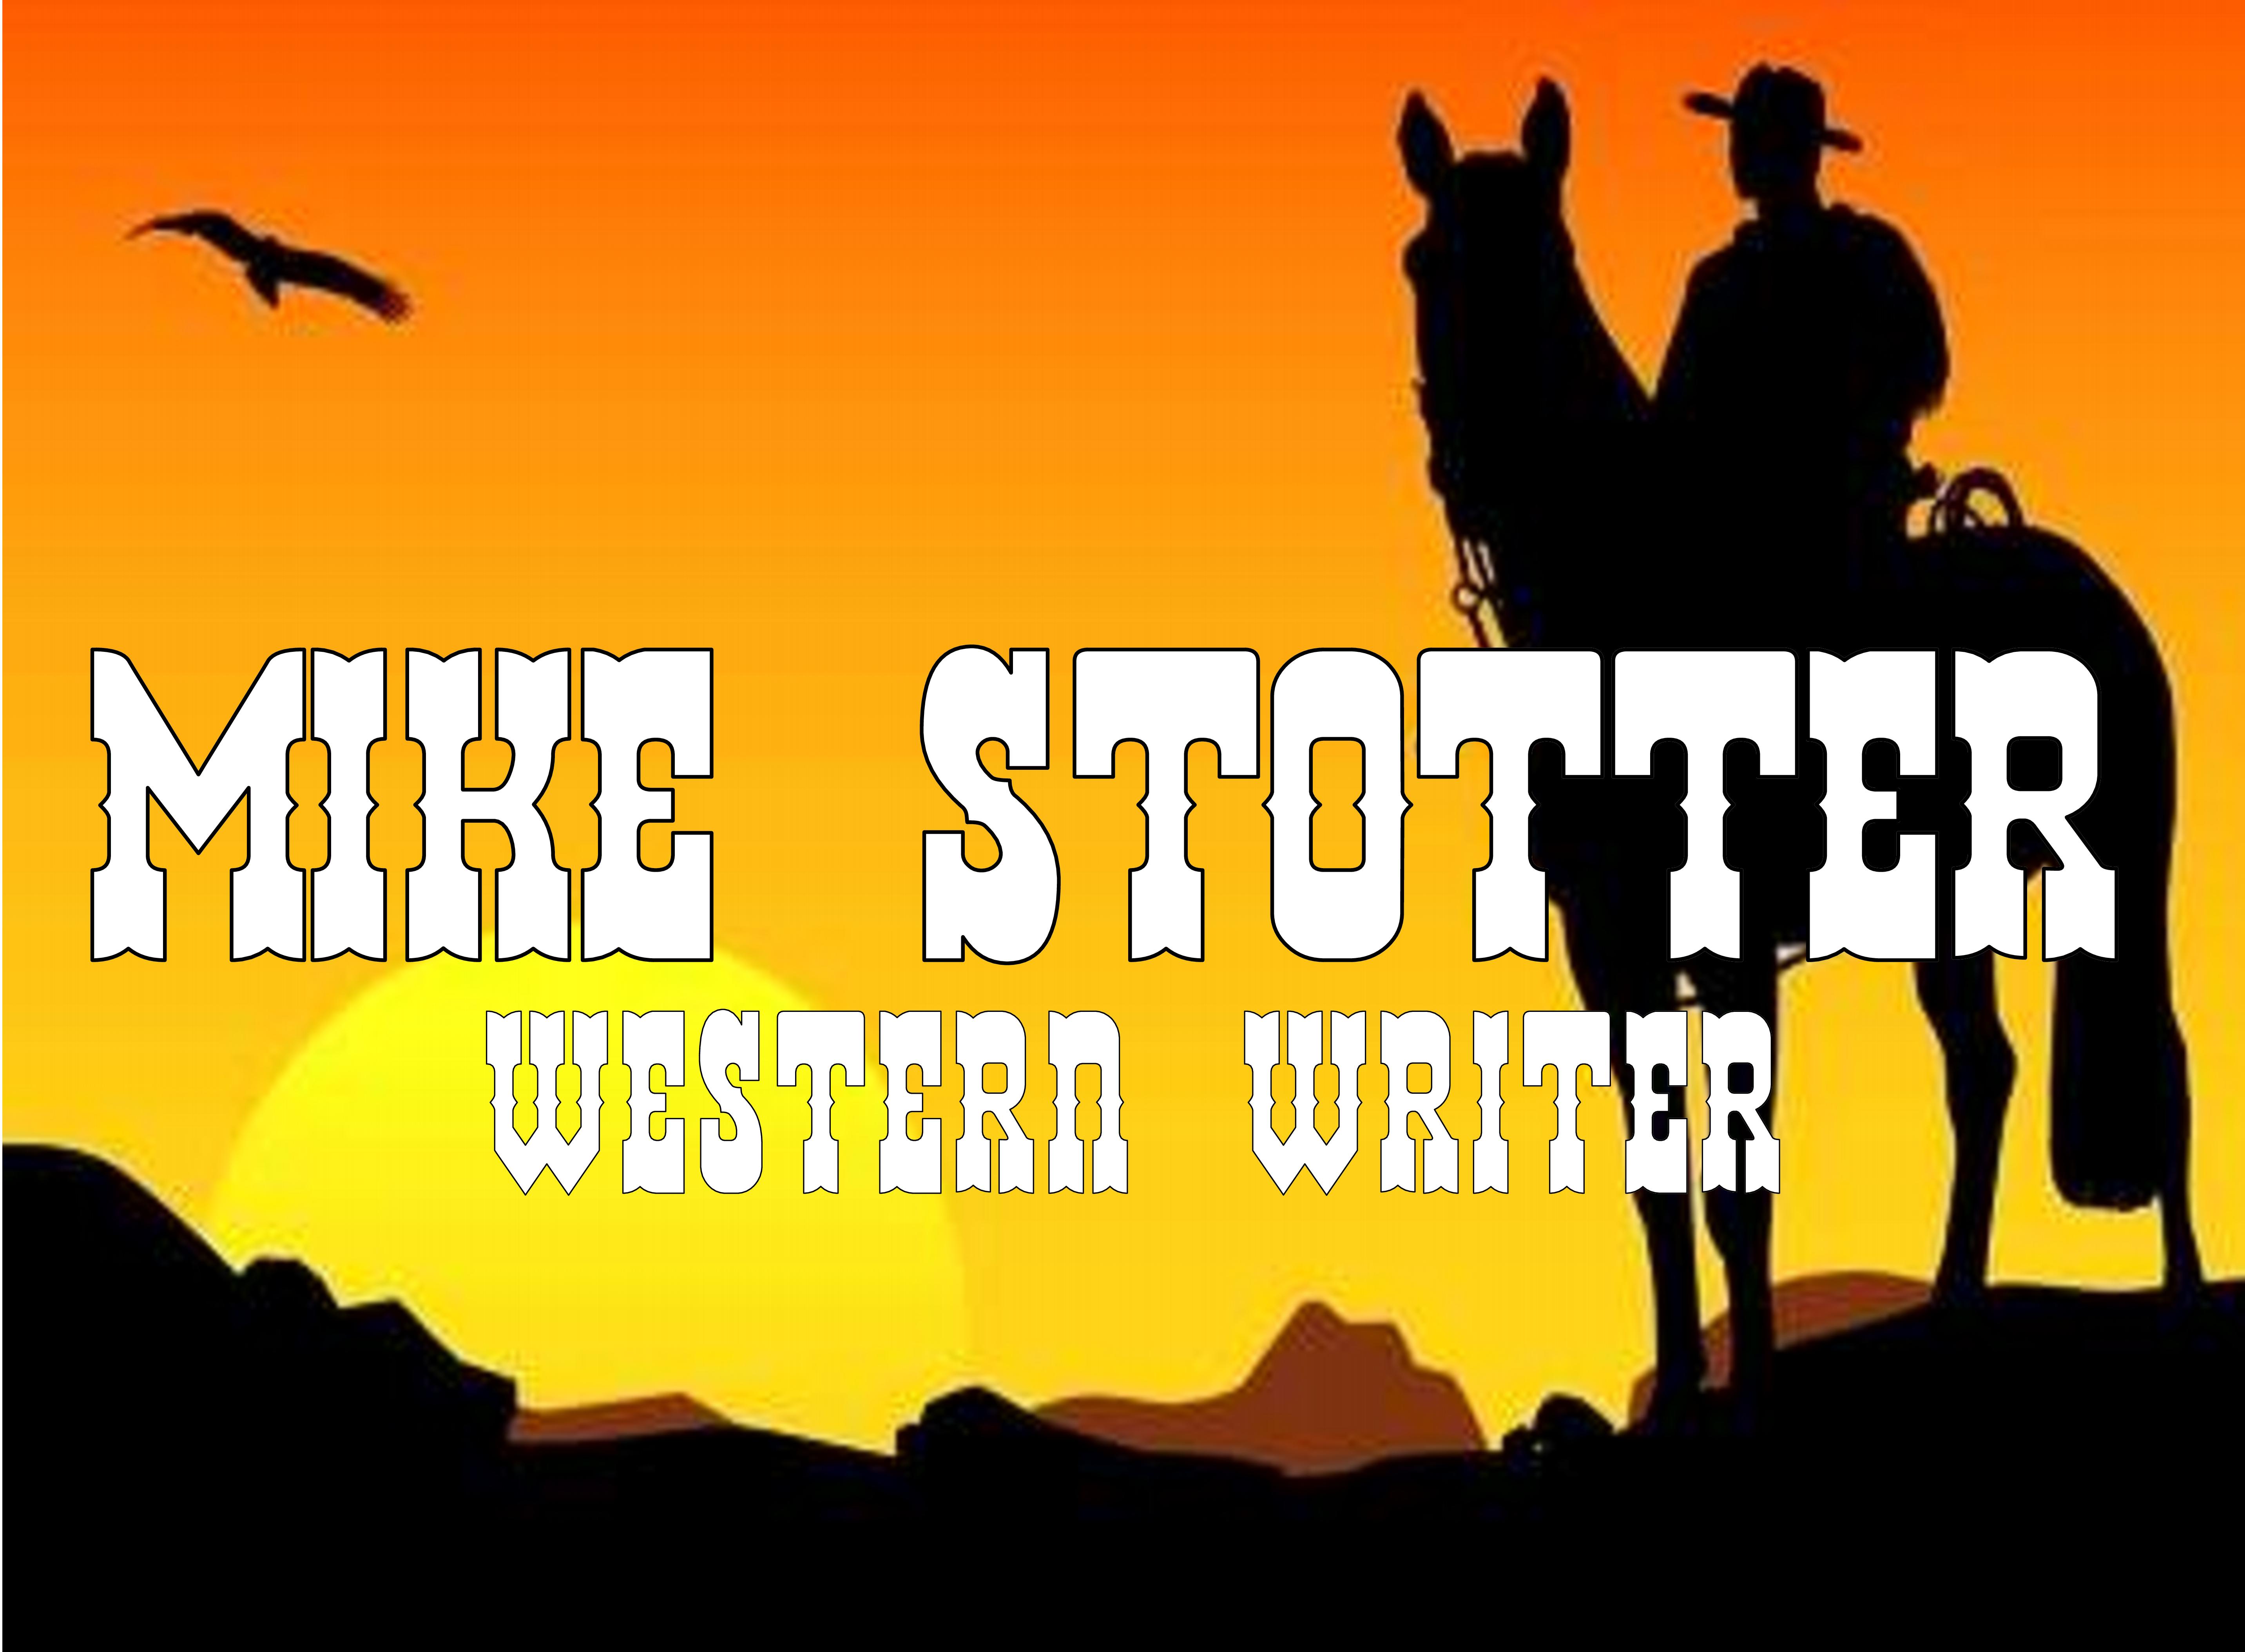 Mike Stotter - Author